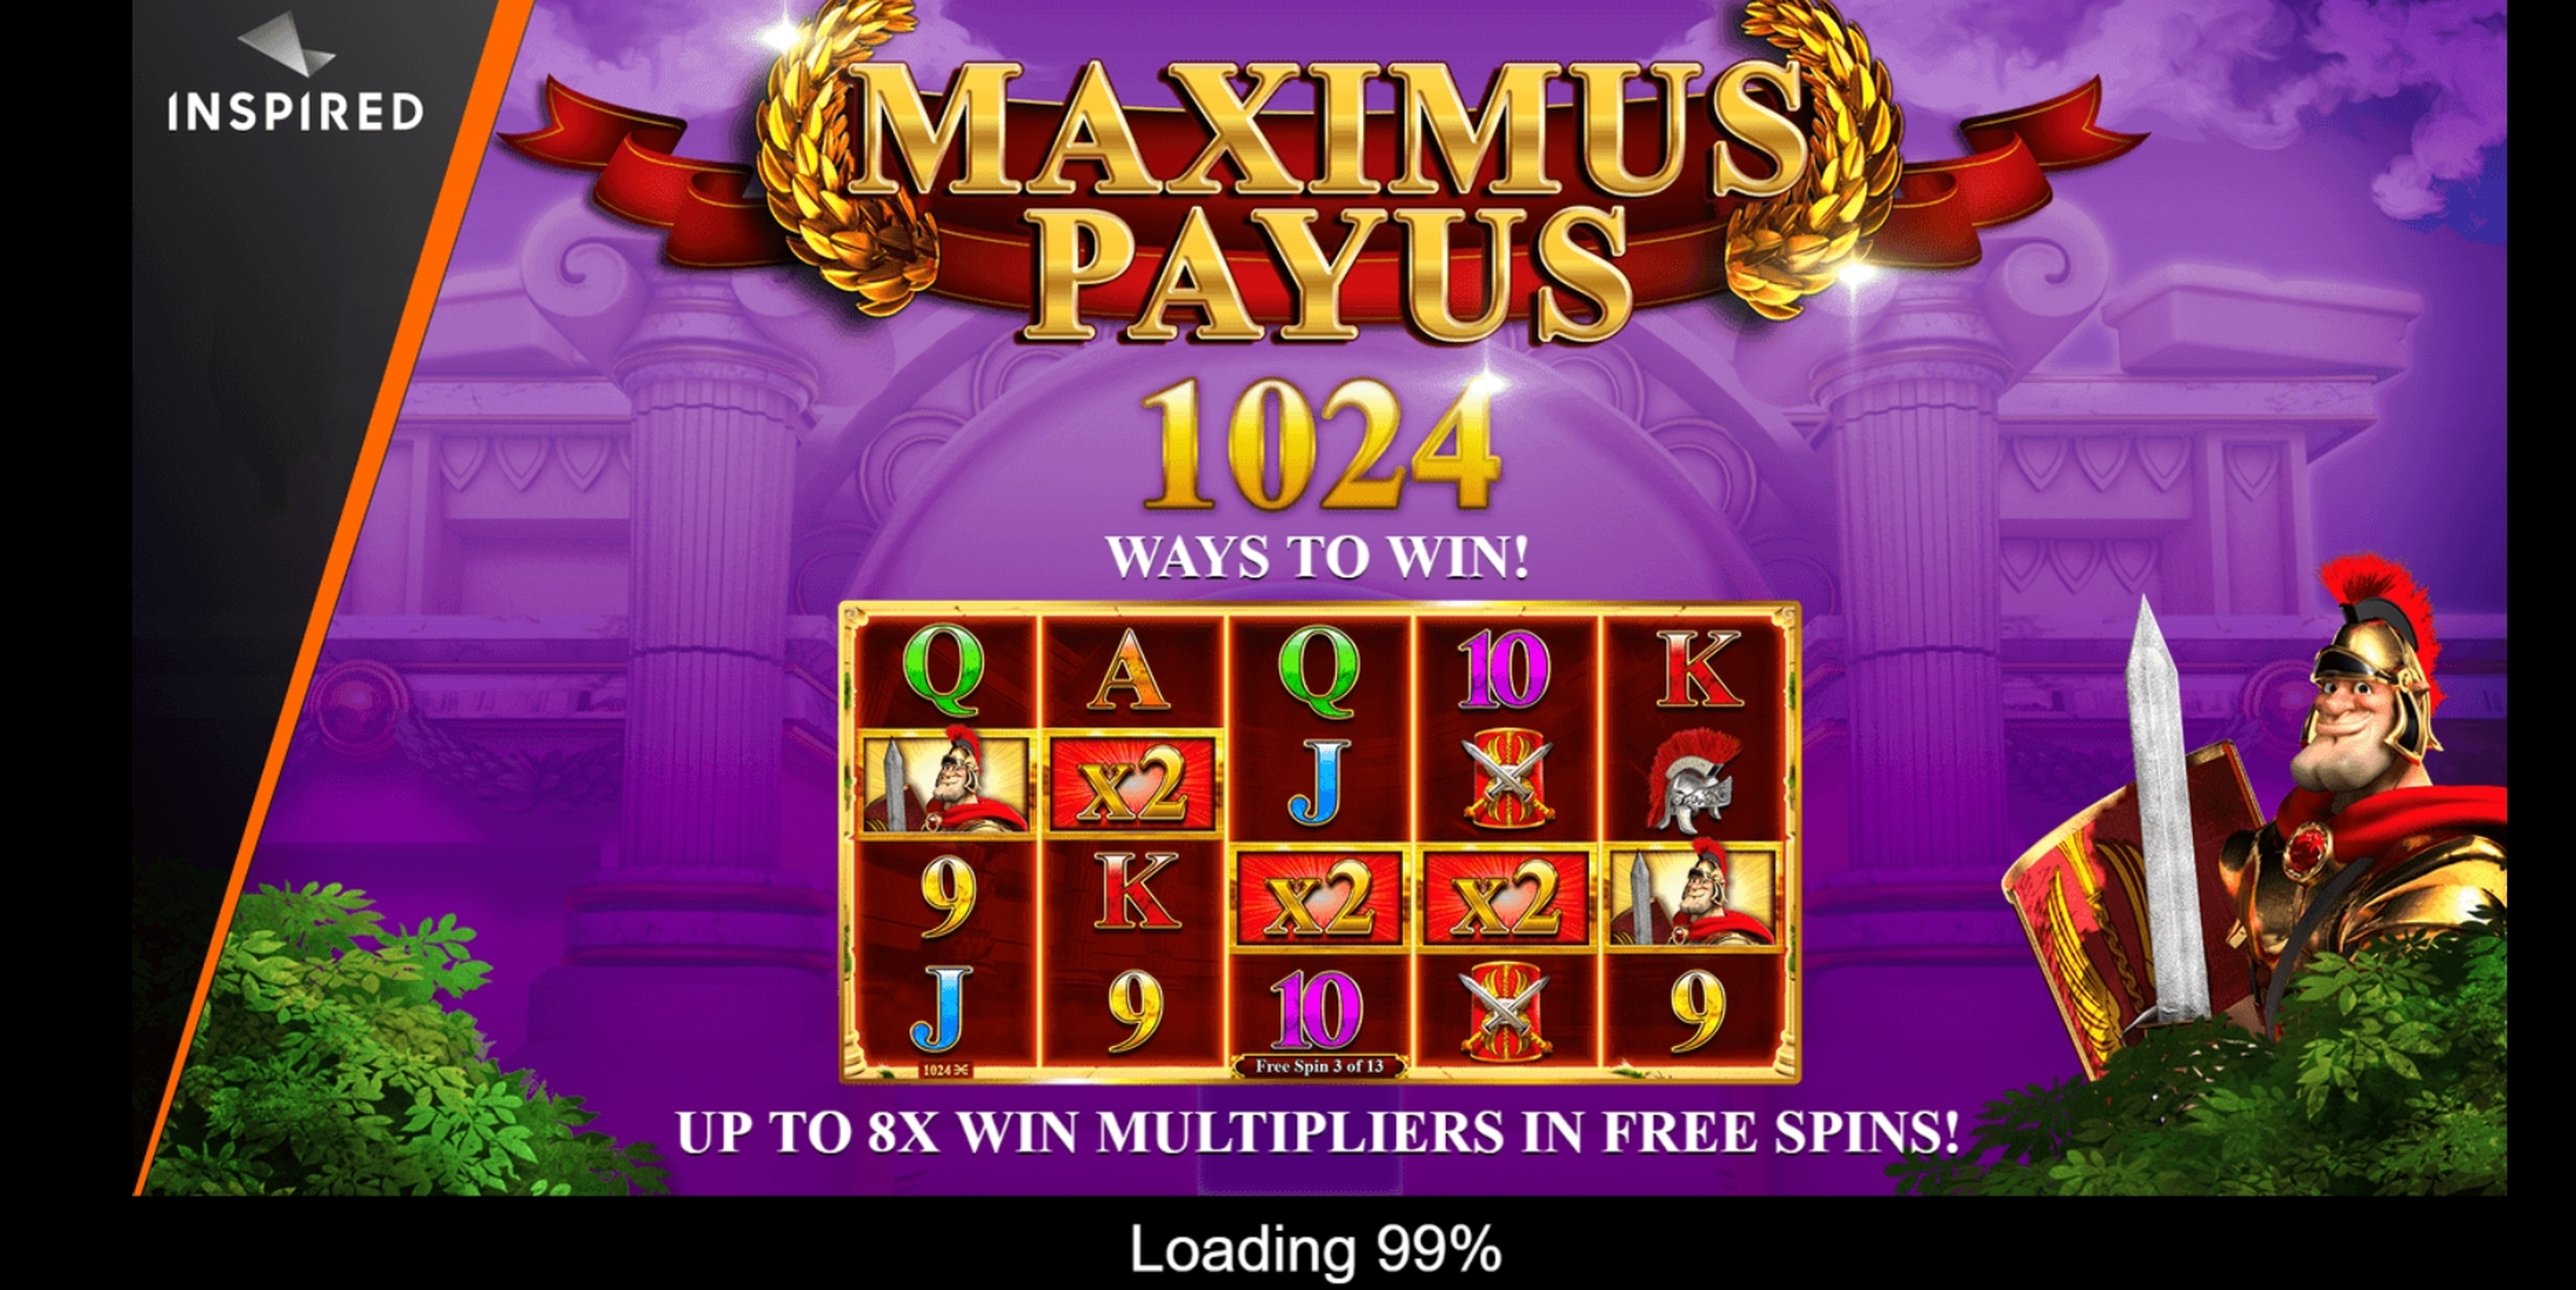 Play Maximus Payus Free Casino Slot Game by Inspired Gaming